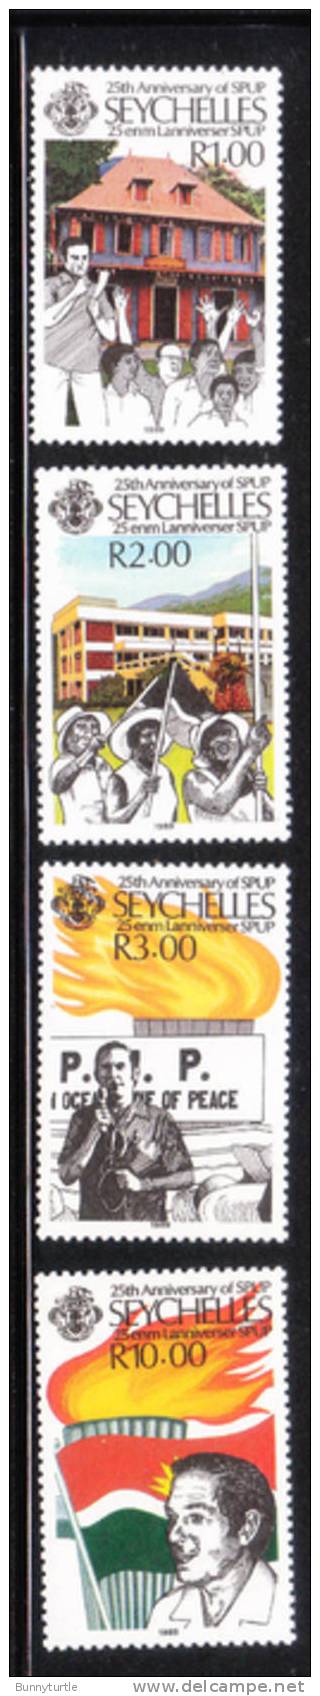 Seychelles 1989 People's United Party SPUP 25th Anniversary MNH - Seychelles (1976-...)